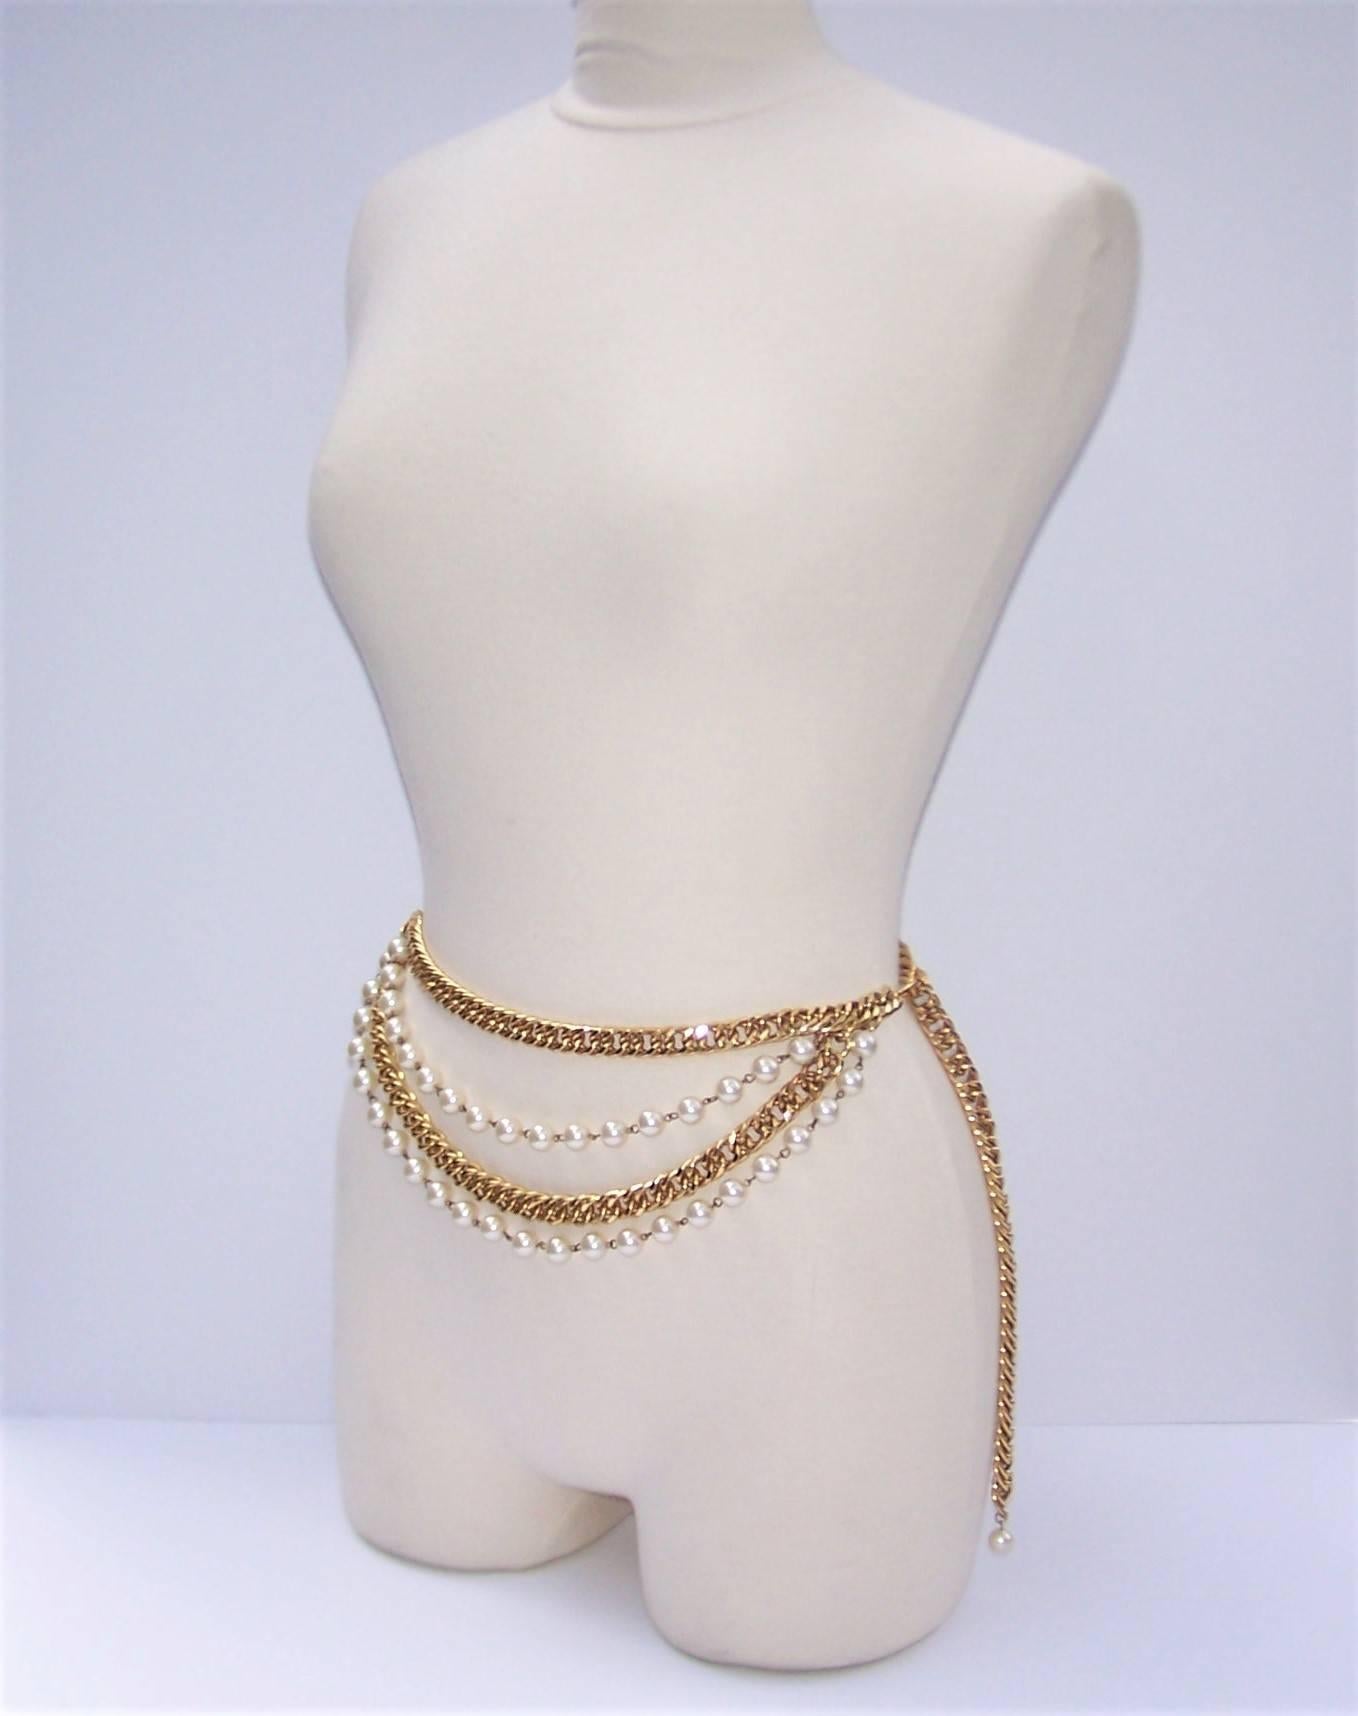 This high quality gold chain belt with pearl embellishment has a classic Chanel look without the price tag.  The heavy gold link chain features a front swag of two pearl strands and one additional gold link strand.  It is designed to hook at the